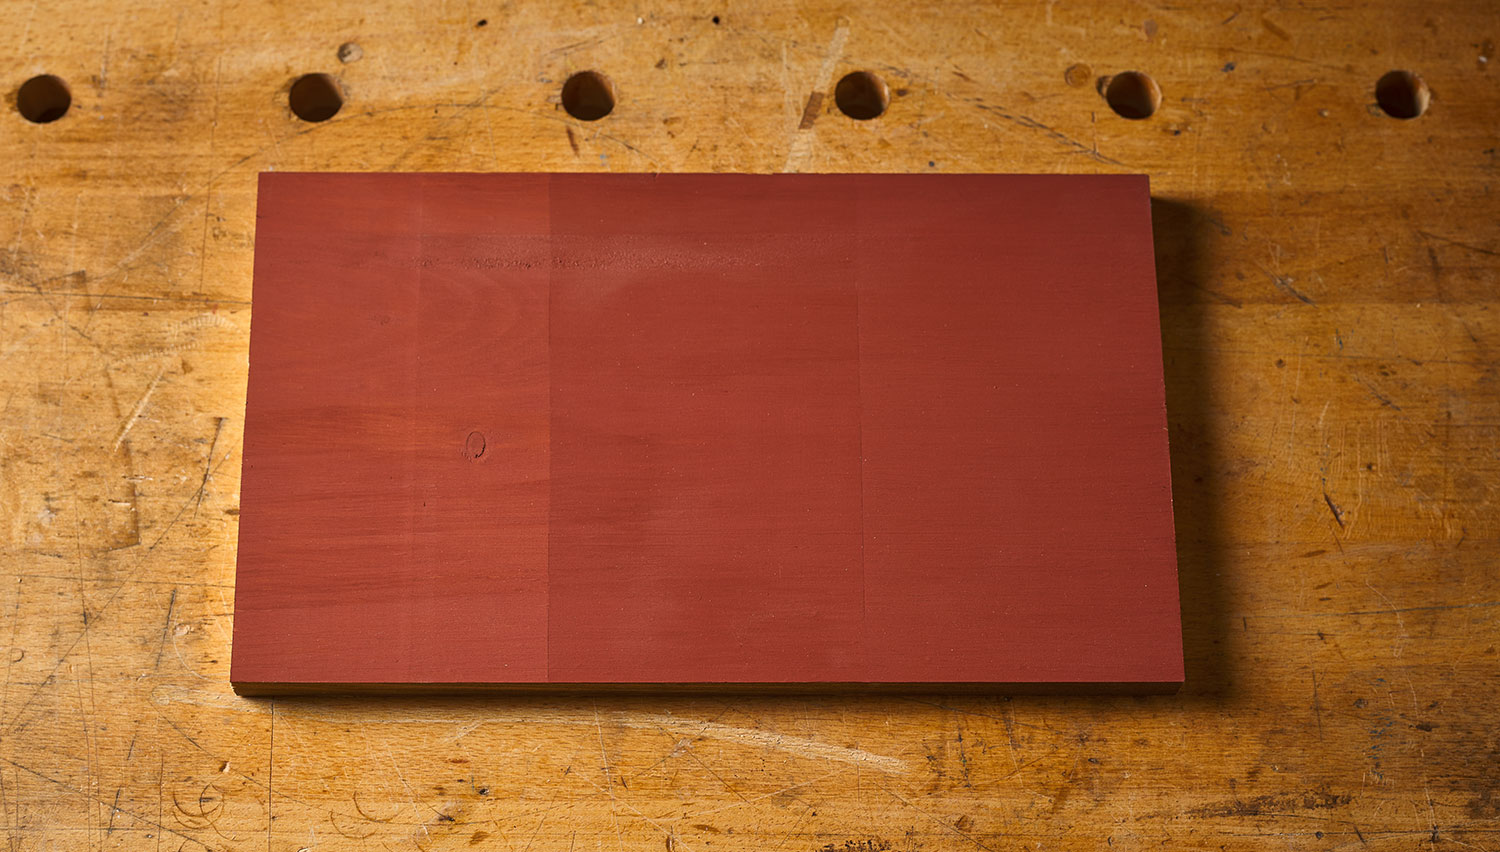 Sample board with, one, two, and three coats.